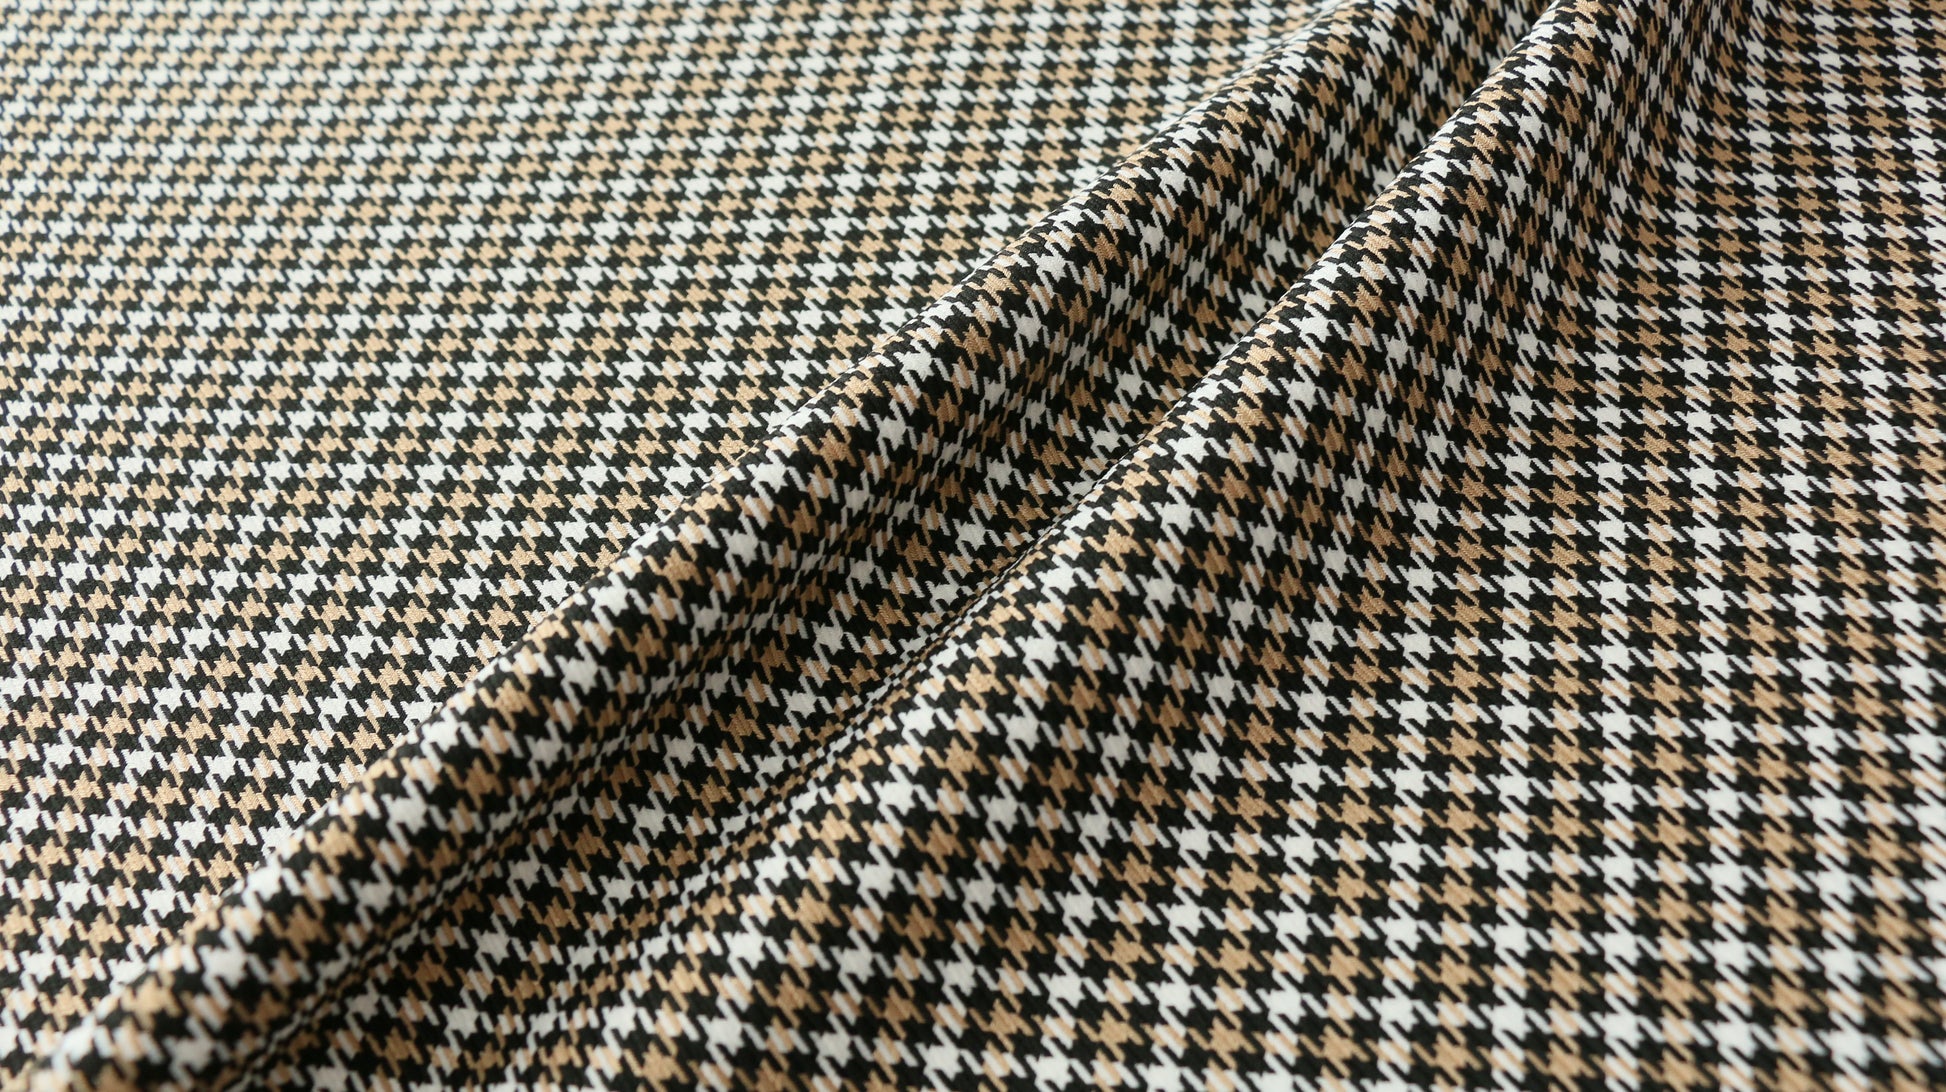 twill-weave-fabric-black-beige-and-white-houndstooth-design-clothcontrol